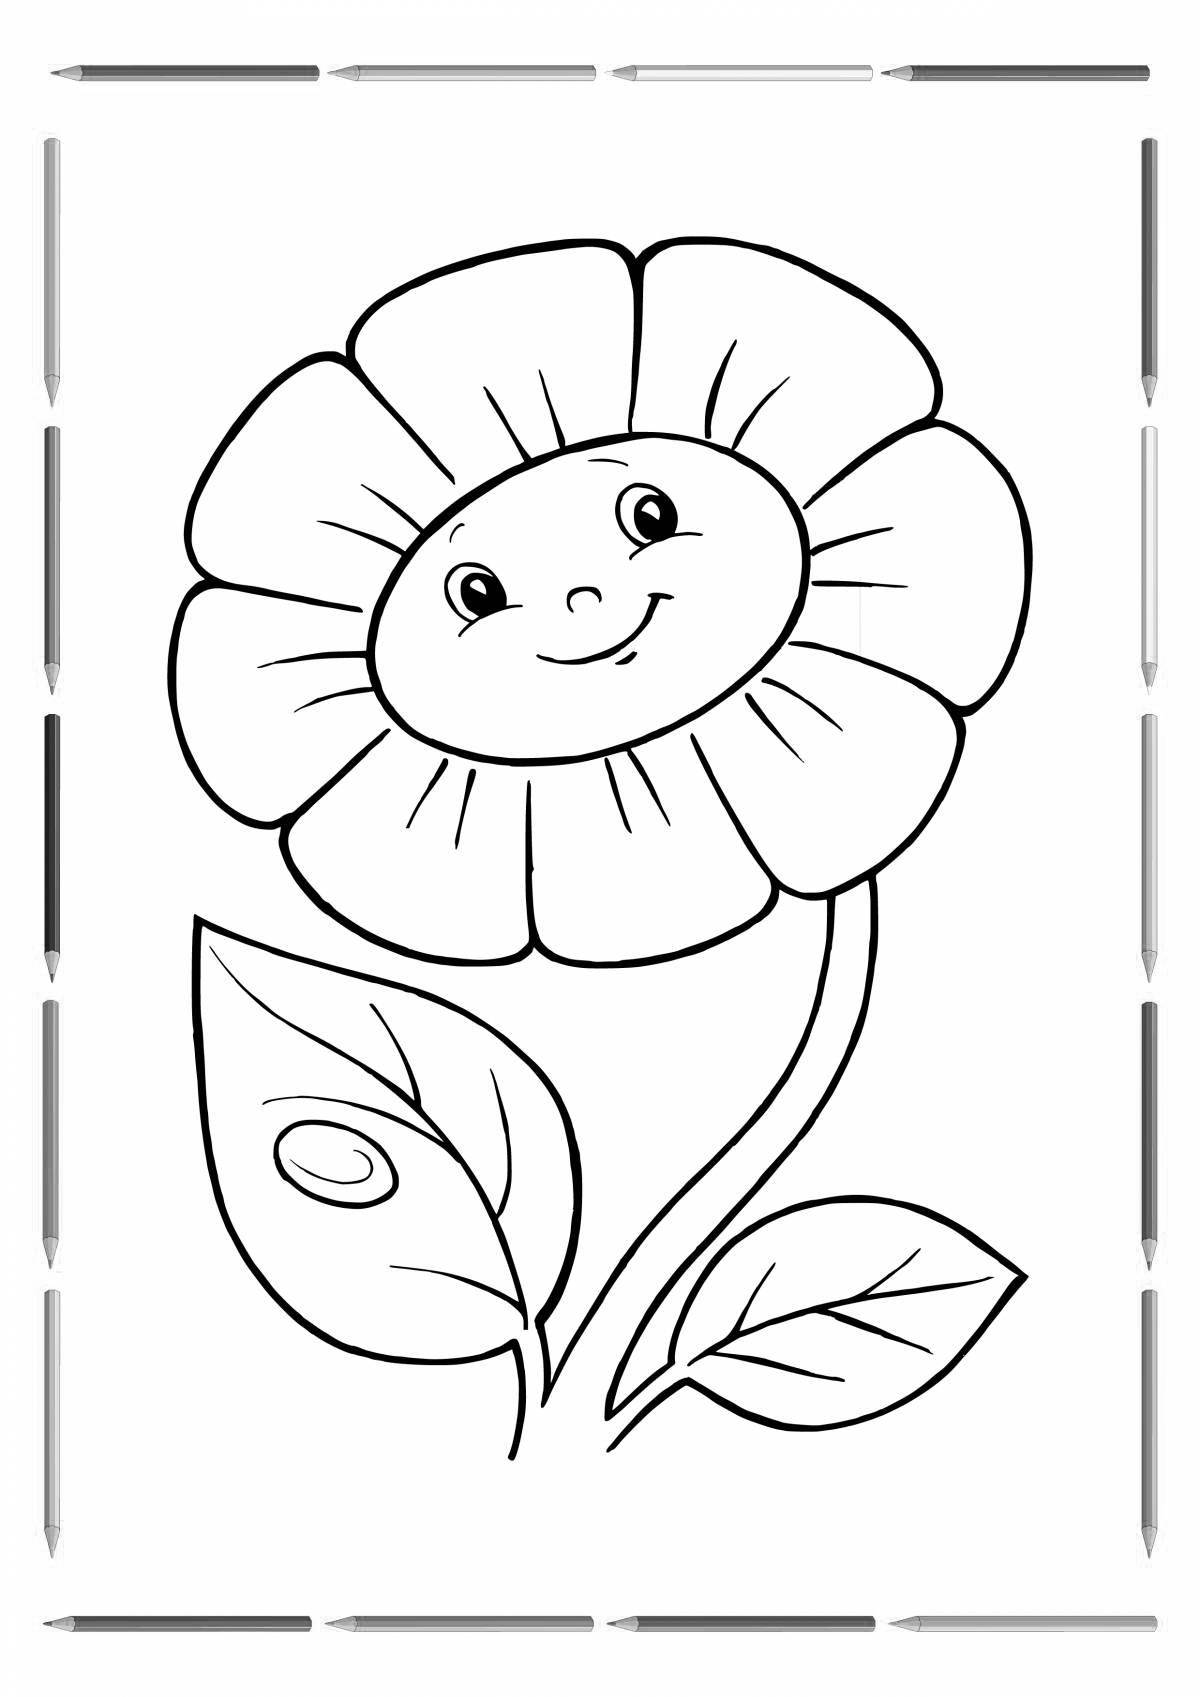 Fantastic seven-color flower coloring book for kids 3-4 years old